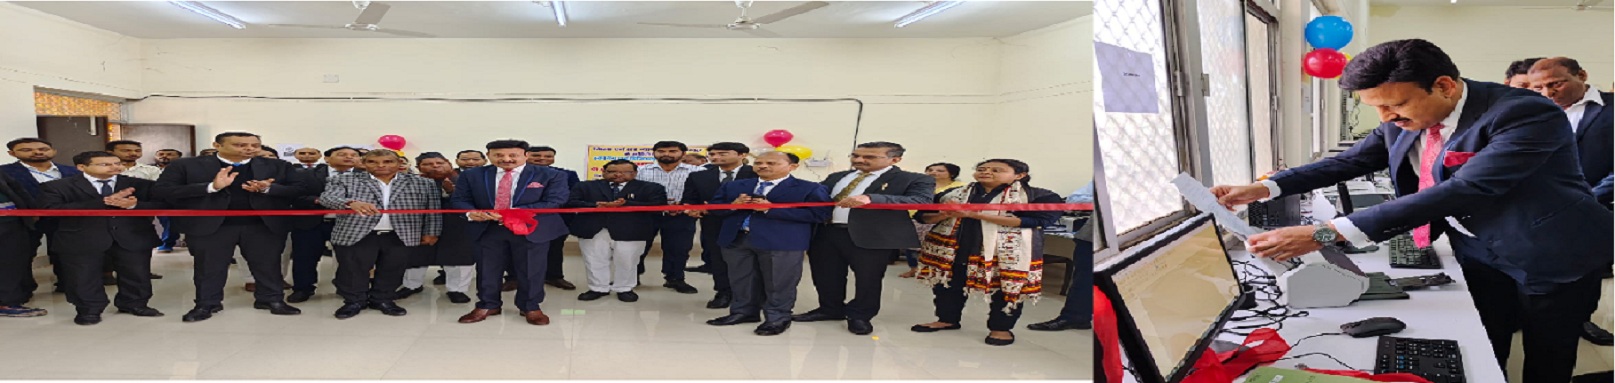 Inauguration of Scanning and Digitization of Court Records